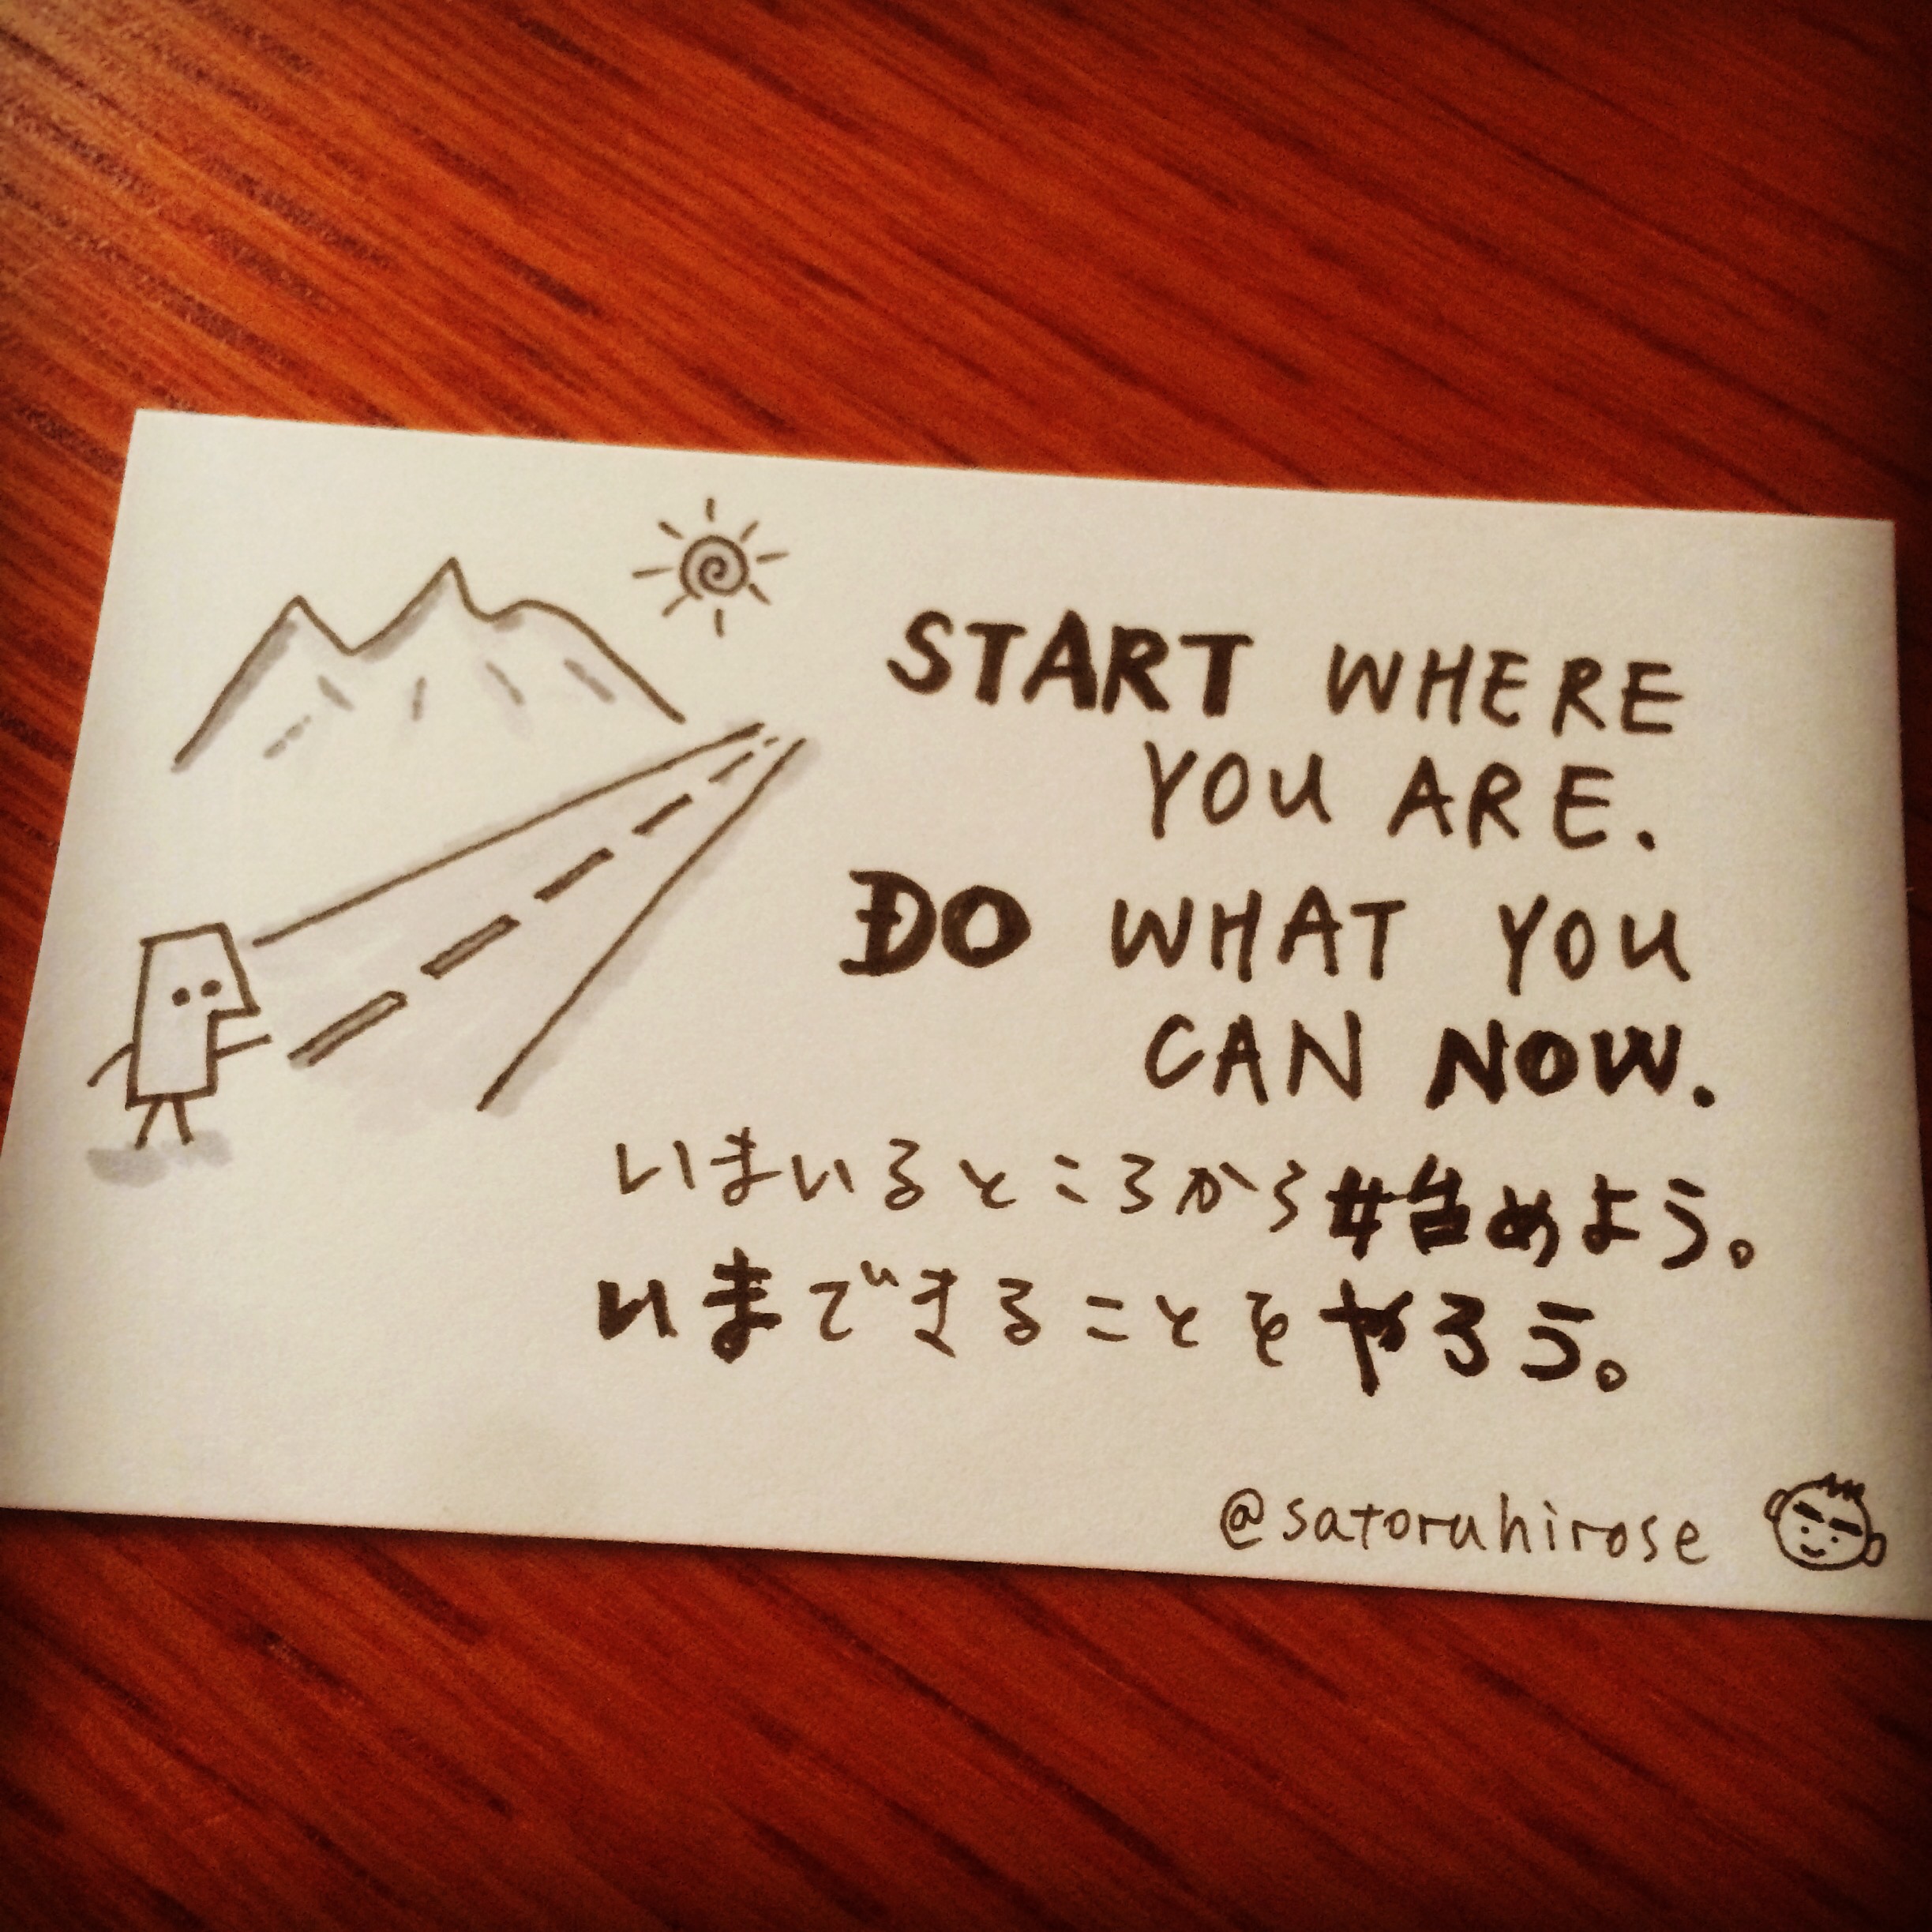 Start where you are. Do what you can now.